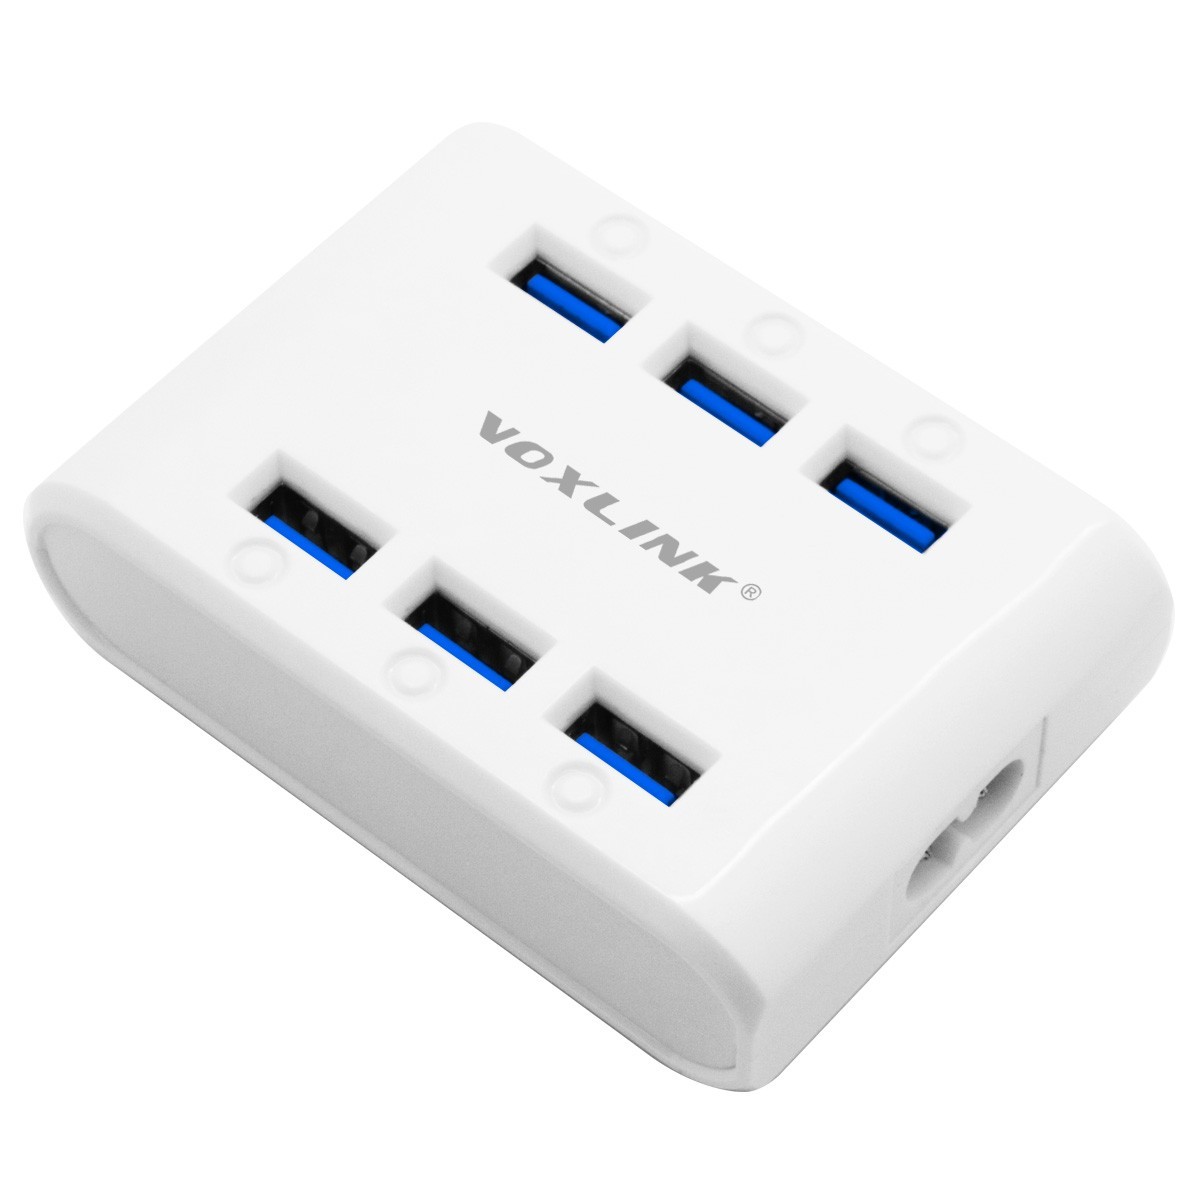 VOXLINK Mini Portable Multi Port USB Charger 24W 4.8A 6-Port USB Charging Station Hub Power Station for iPhone iPad Tablet white US